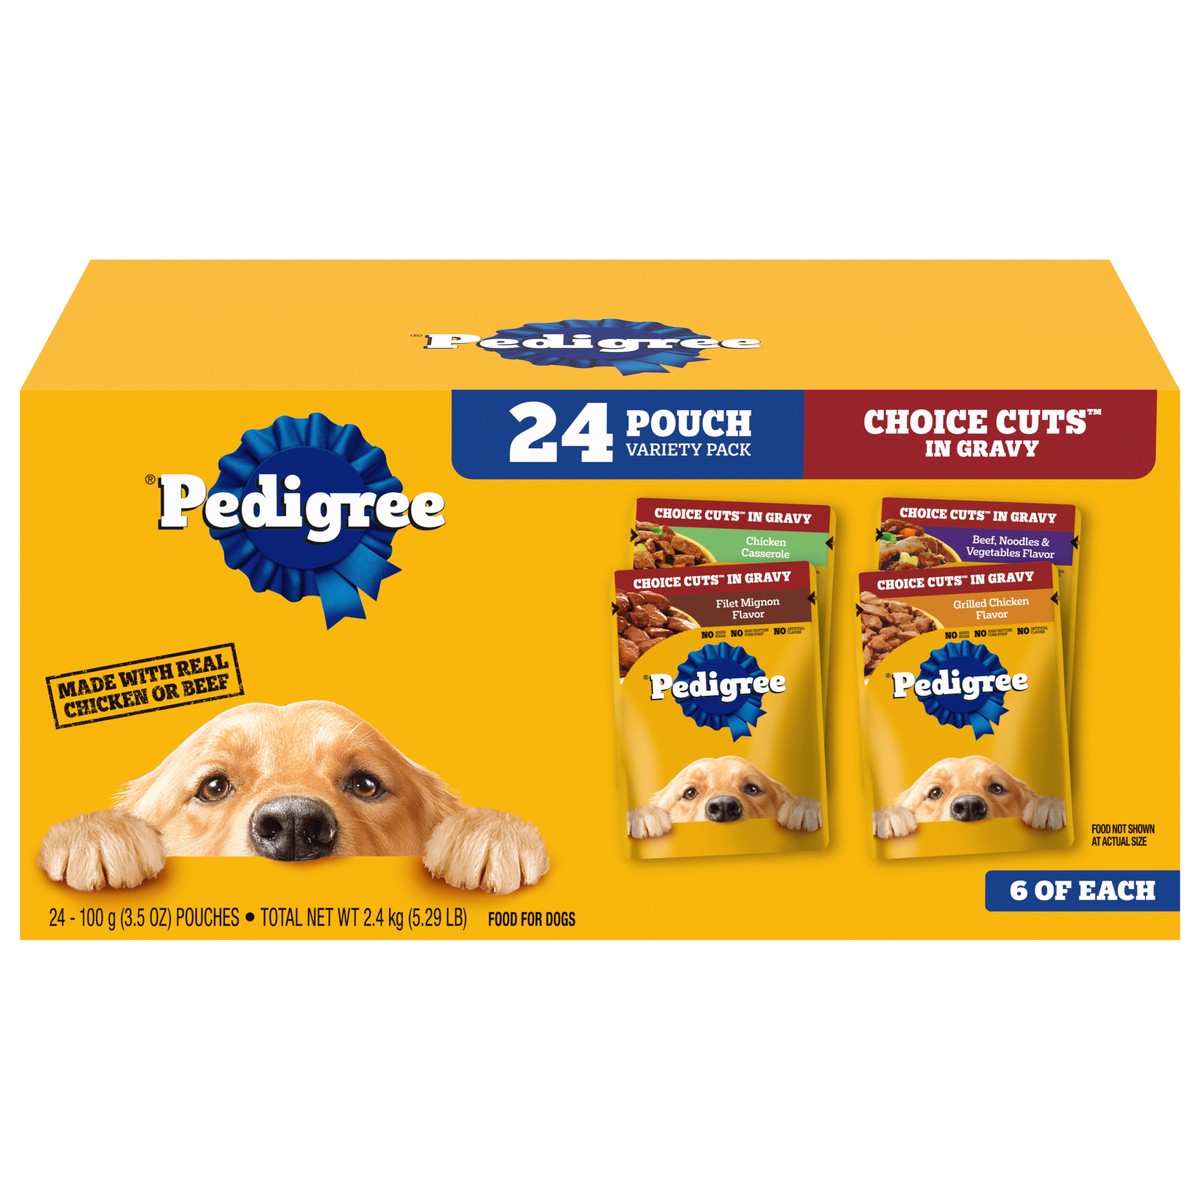 slide 1 of 4, Pedigree Choice Cuts in Gravy Food for Dogs Variety Pack 24 - 100 g Pouches, 24 ct